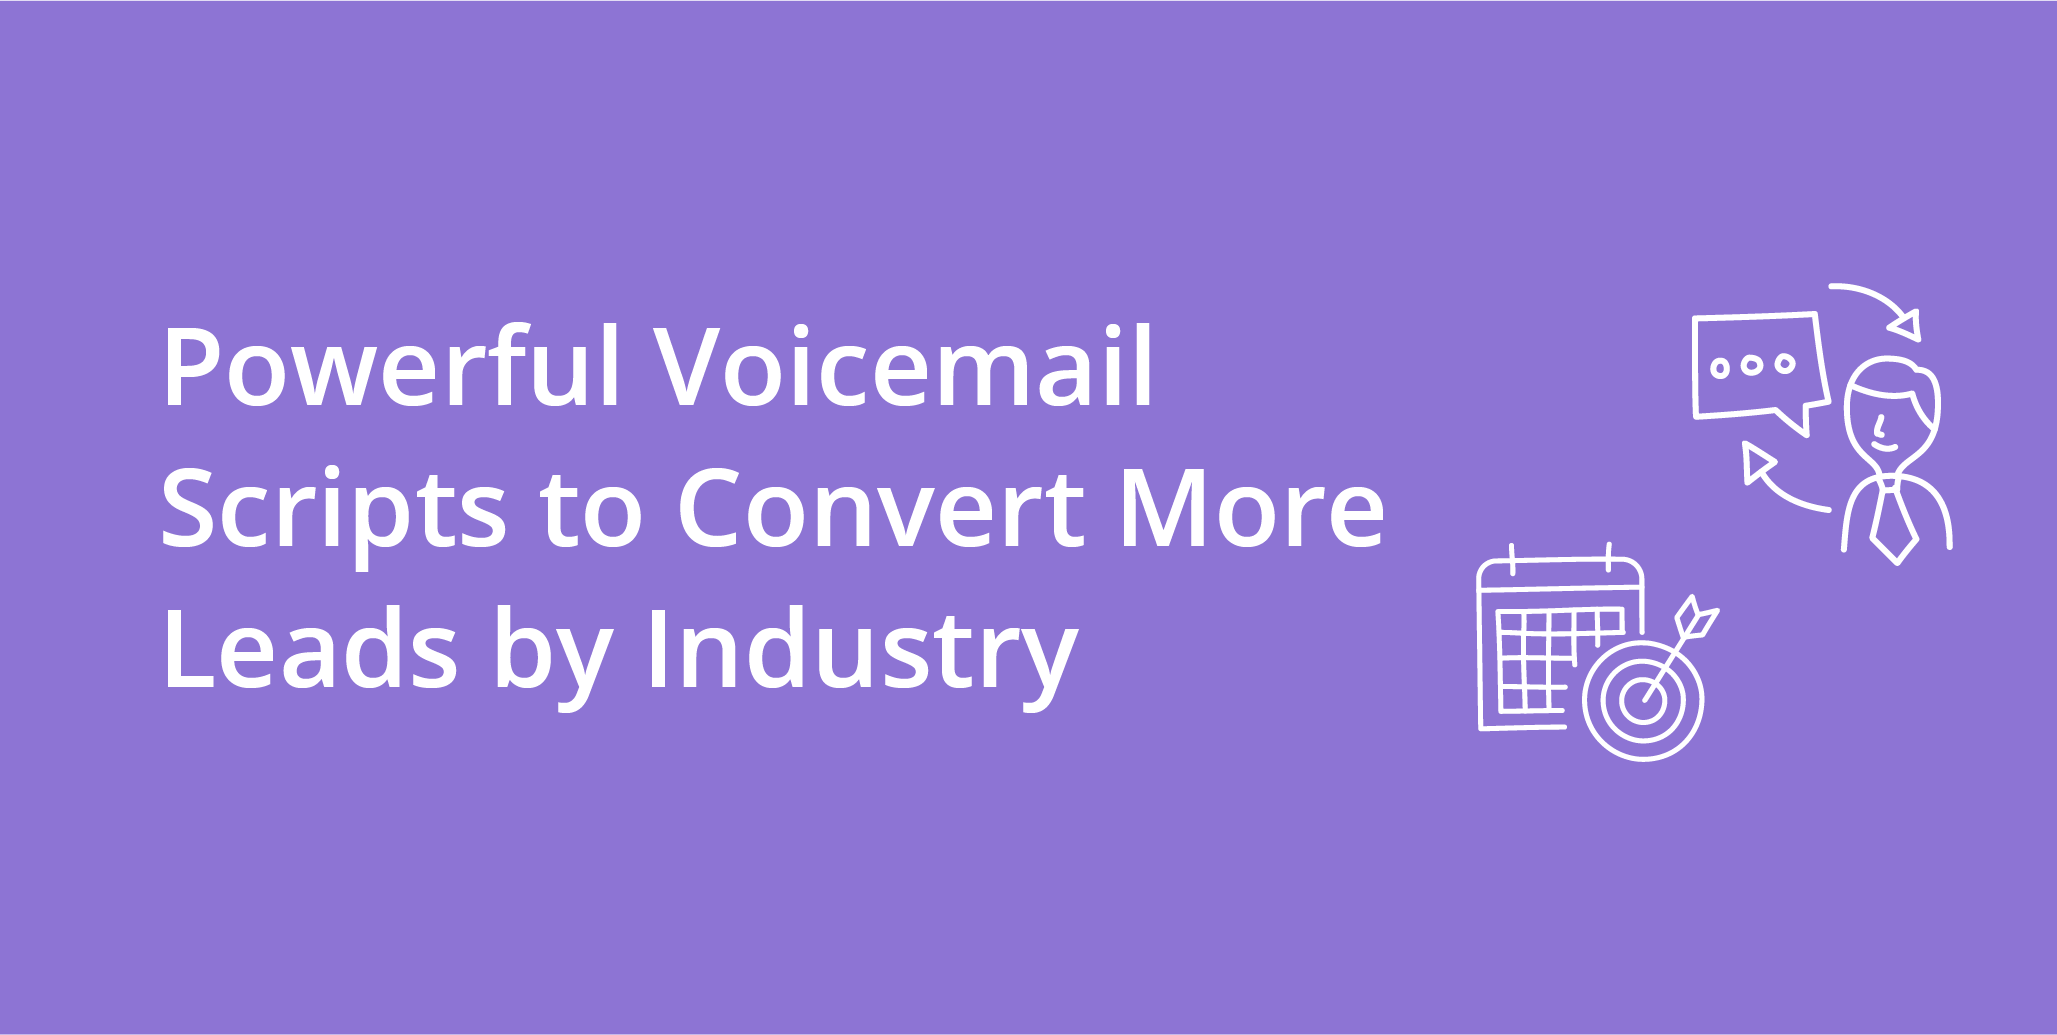 /assets/img/uploads/articles/powerful-voicemail-scripts-to-convert-more-leads-by-industry.png